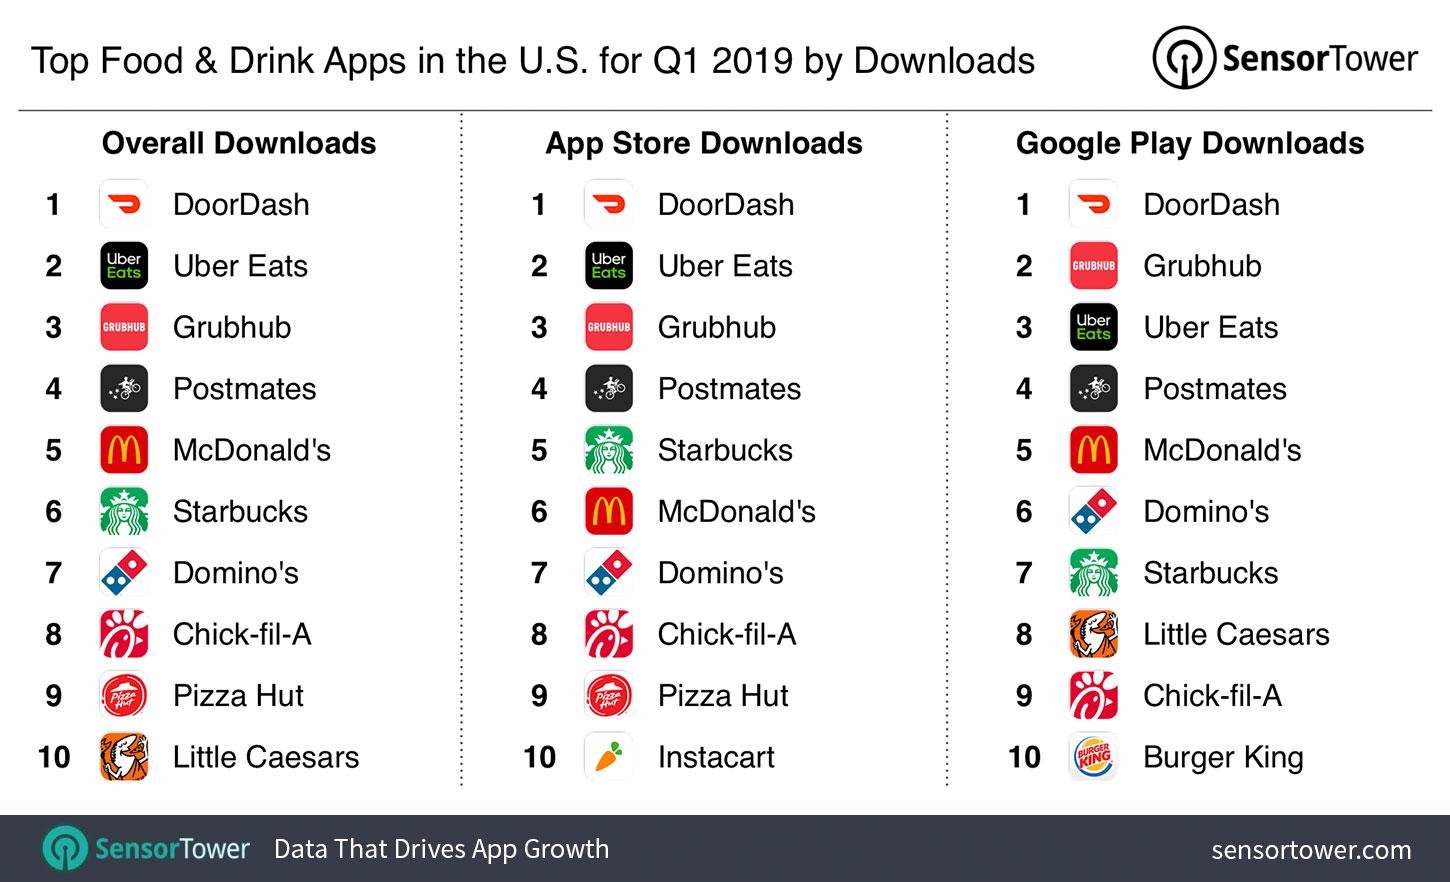 Top Food & Drink Apps in the U.S. for Q1 2019 by Downloads